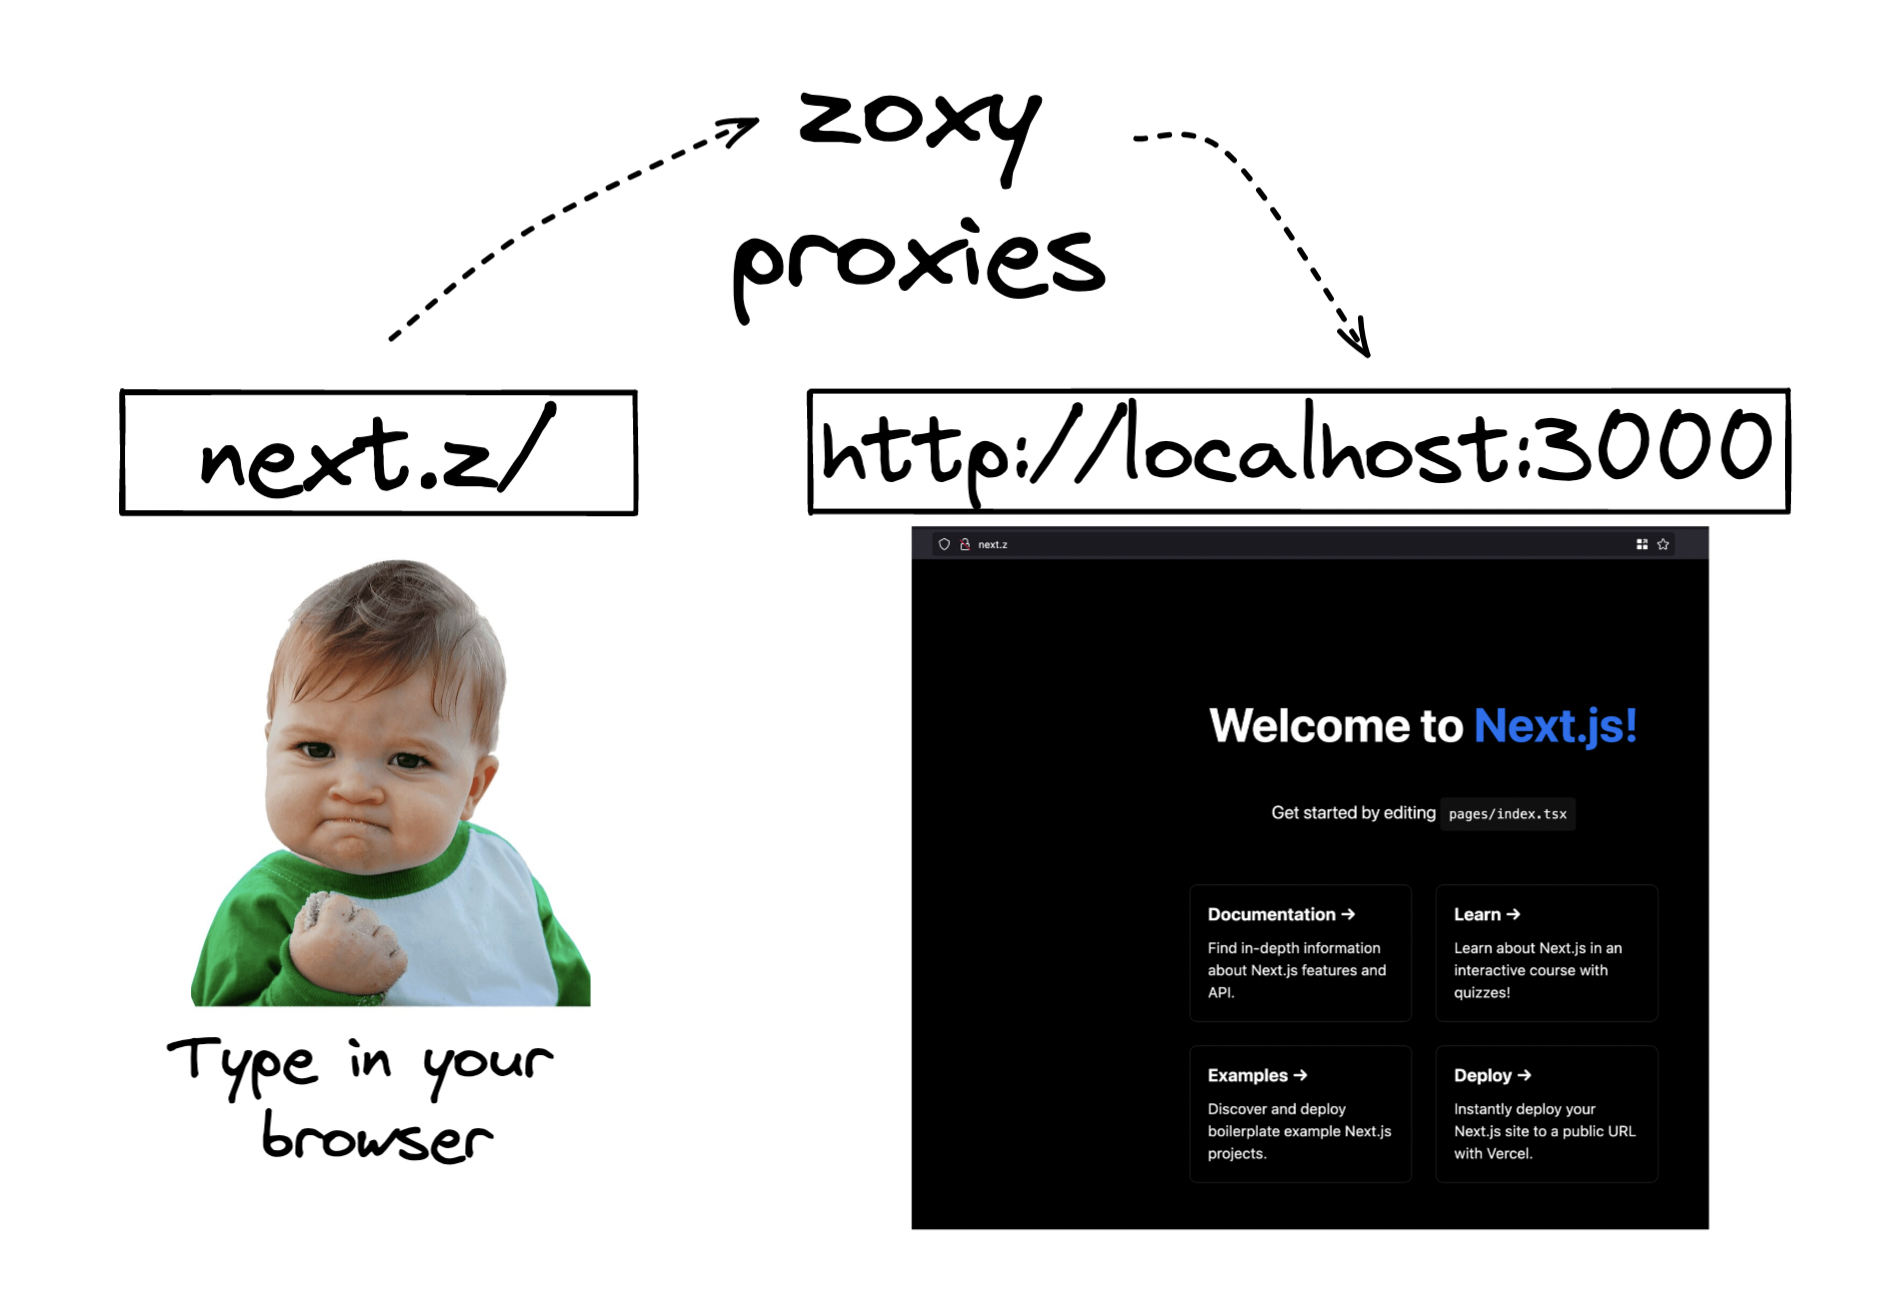 A diagram explaining zoxy, the app I built. On the left side the user (represented by the success kid meme) types hugo.z in their browser, then an arrow points to a box labelled 'zoxy proxies' and that points to another box labelled localhost:1313.